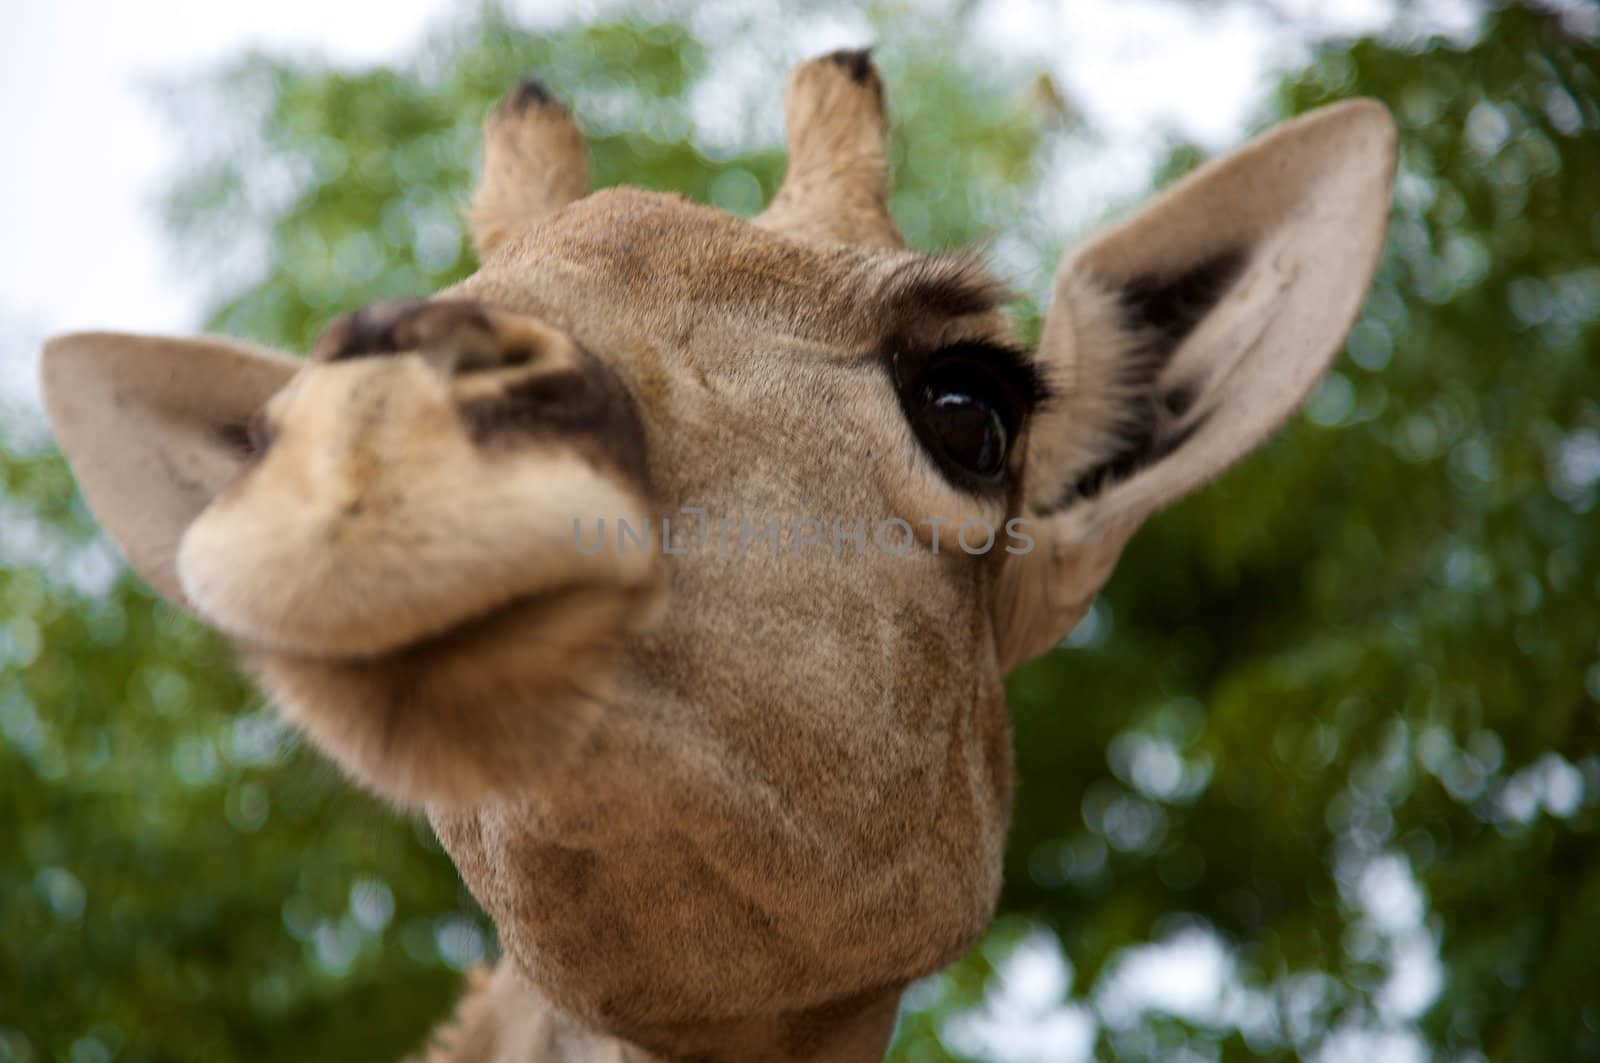 Close-up of giraffe's head in Namibia with green blurred background